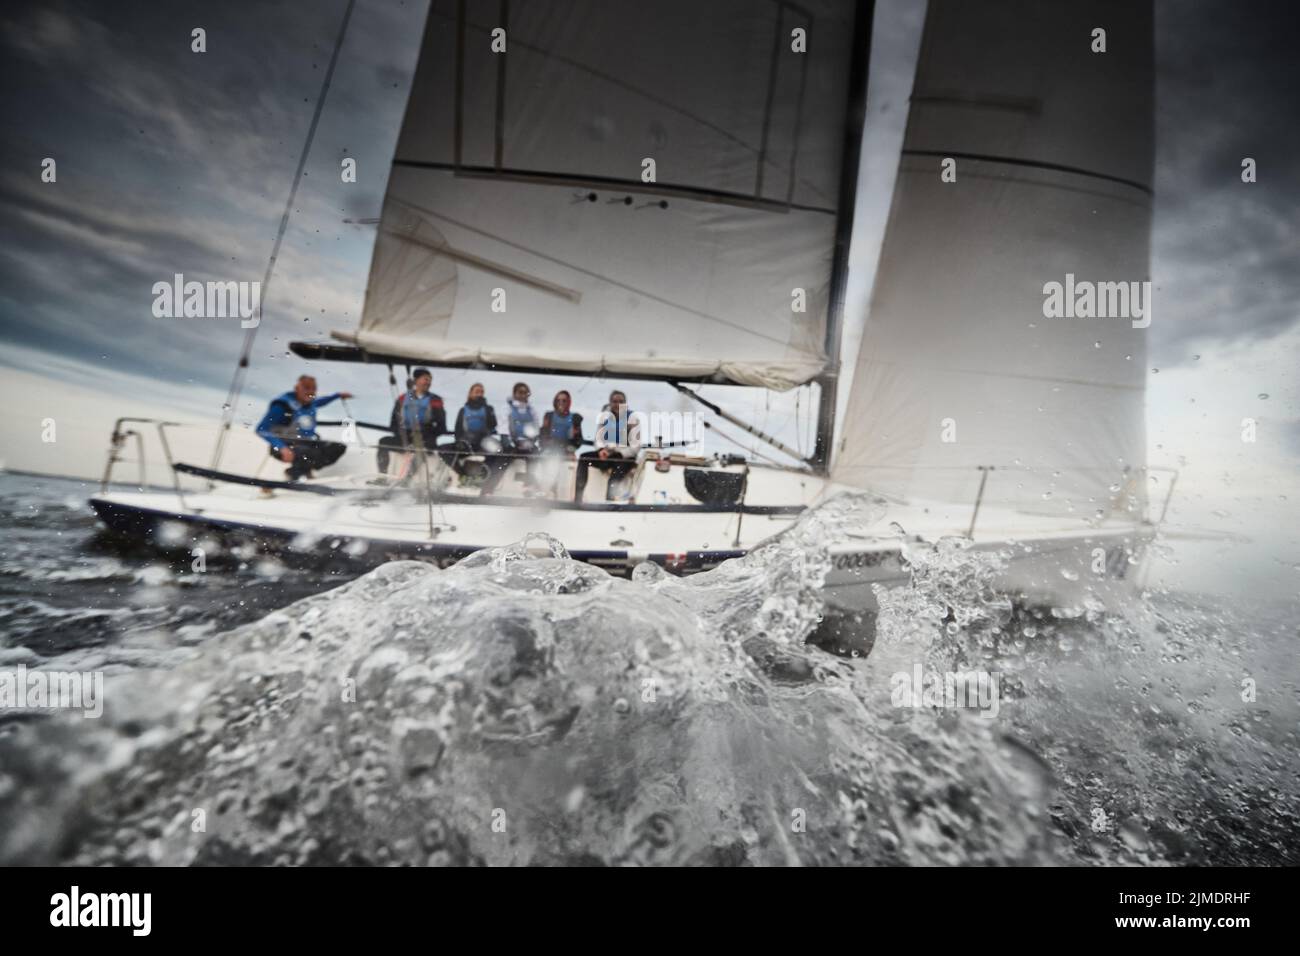 Participants of a sailing regatta on the sailboat, pull ropes, water splashes in the foreground, focus on splashes Stock Photo